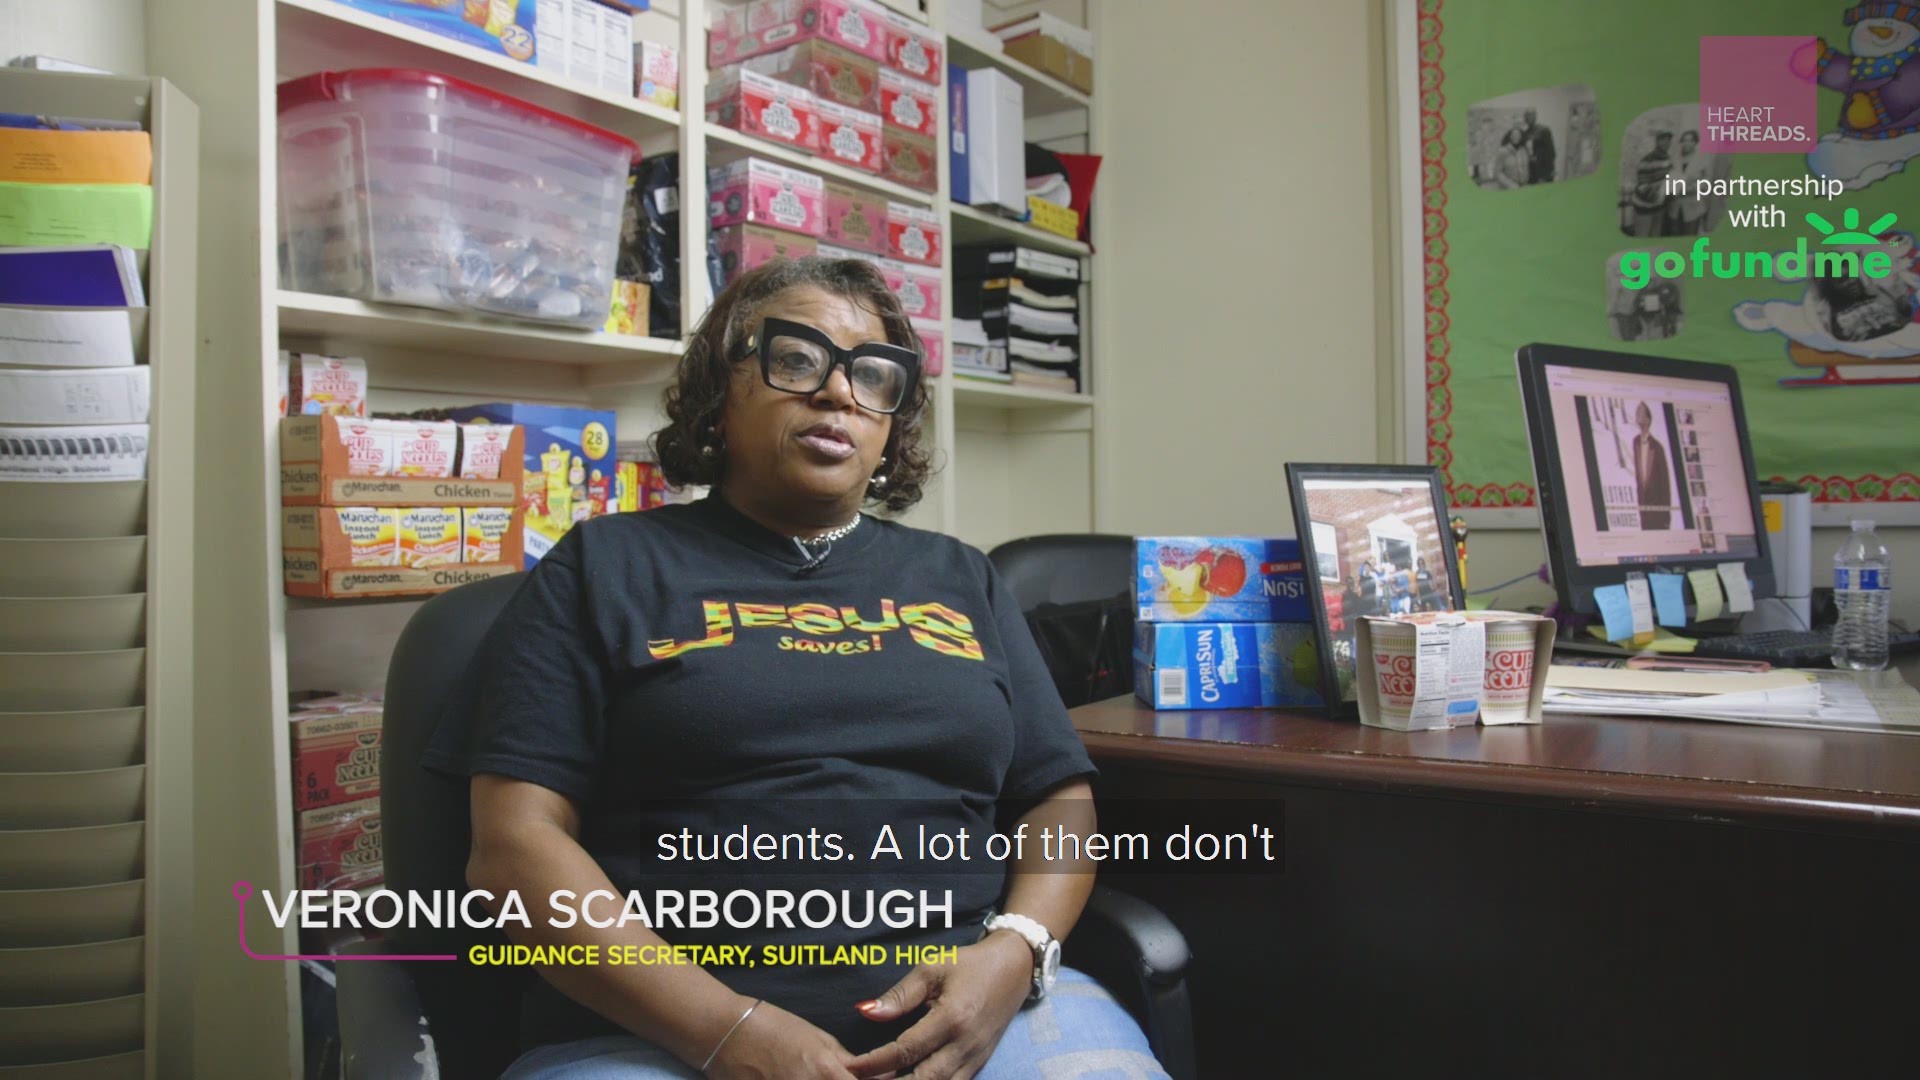 Veronica Scarborough has been collecting food for needy students for five years.